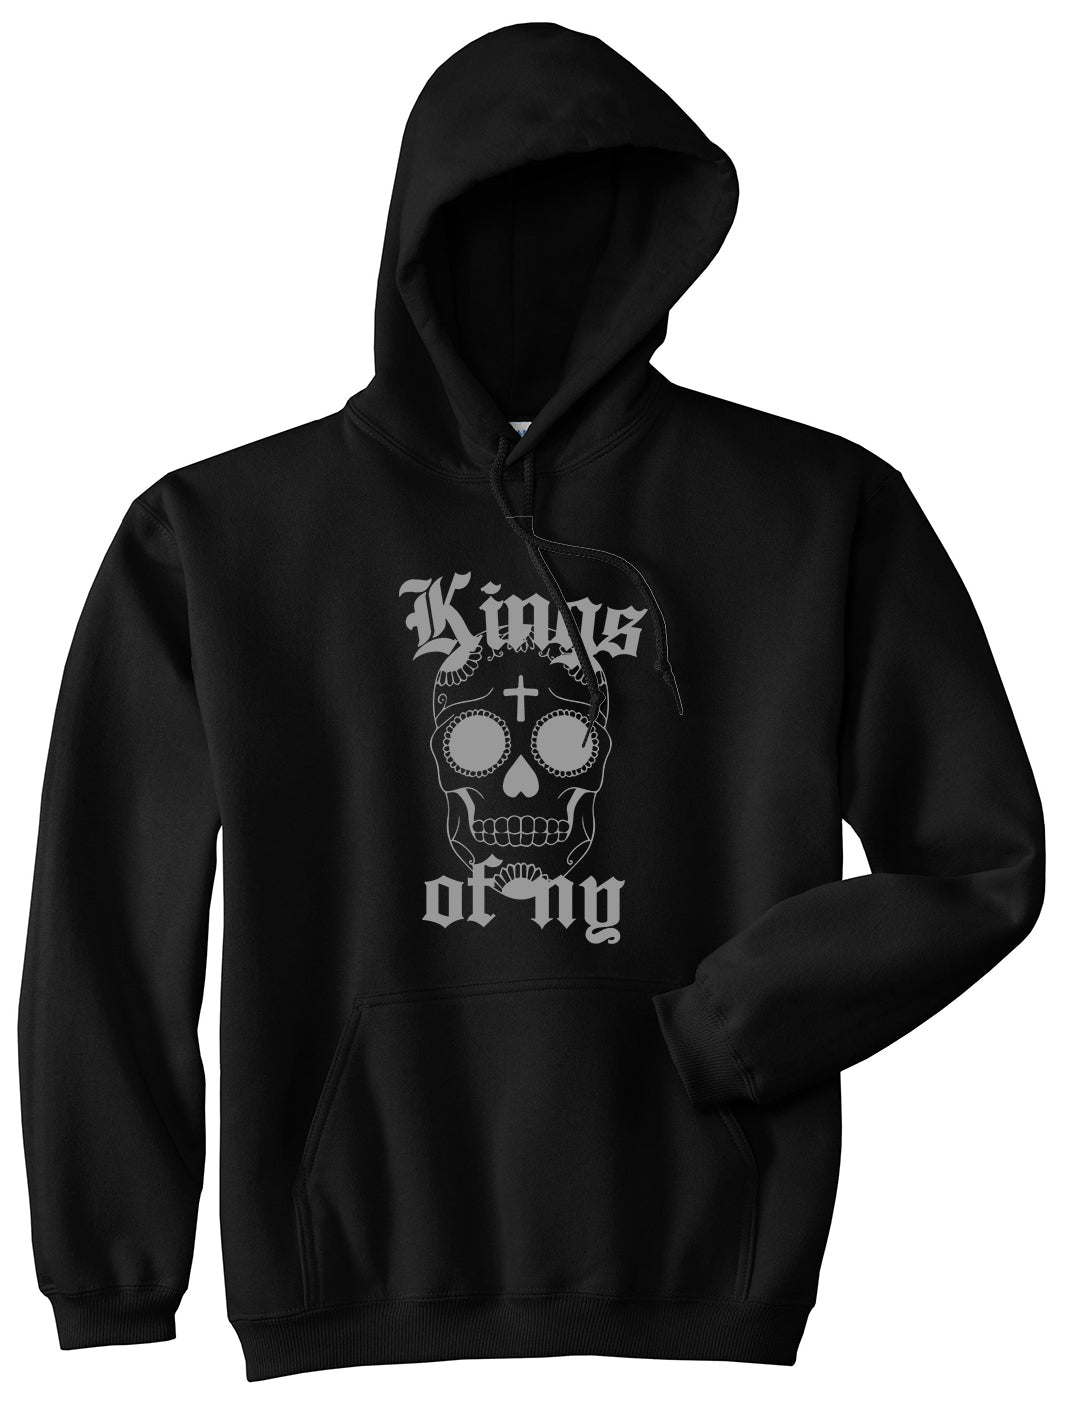 Day Of The Dead KONY Mens Pullover Hoodie Black by Kings Of NY